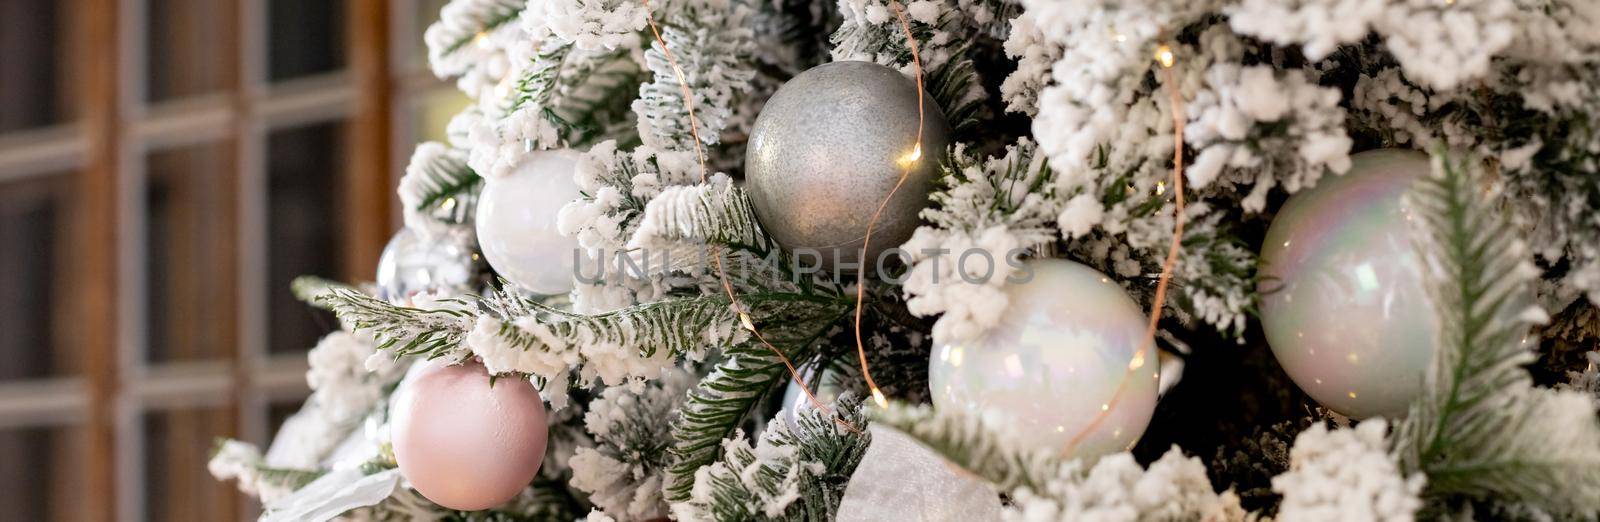 Christmas texture of white delicate Christmas tree and Christmas decorations, balls and ribbons, garland and lights.